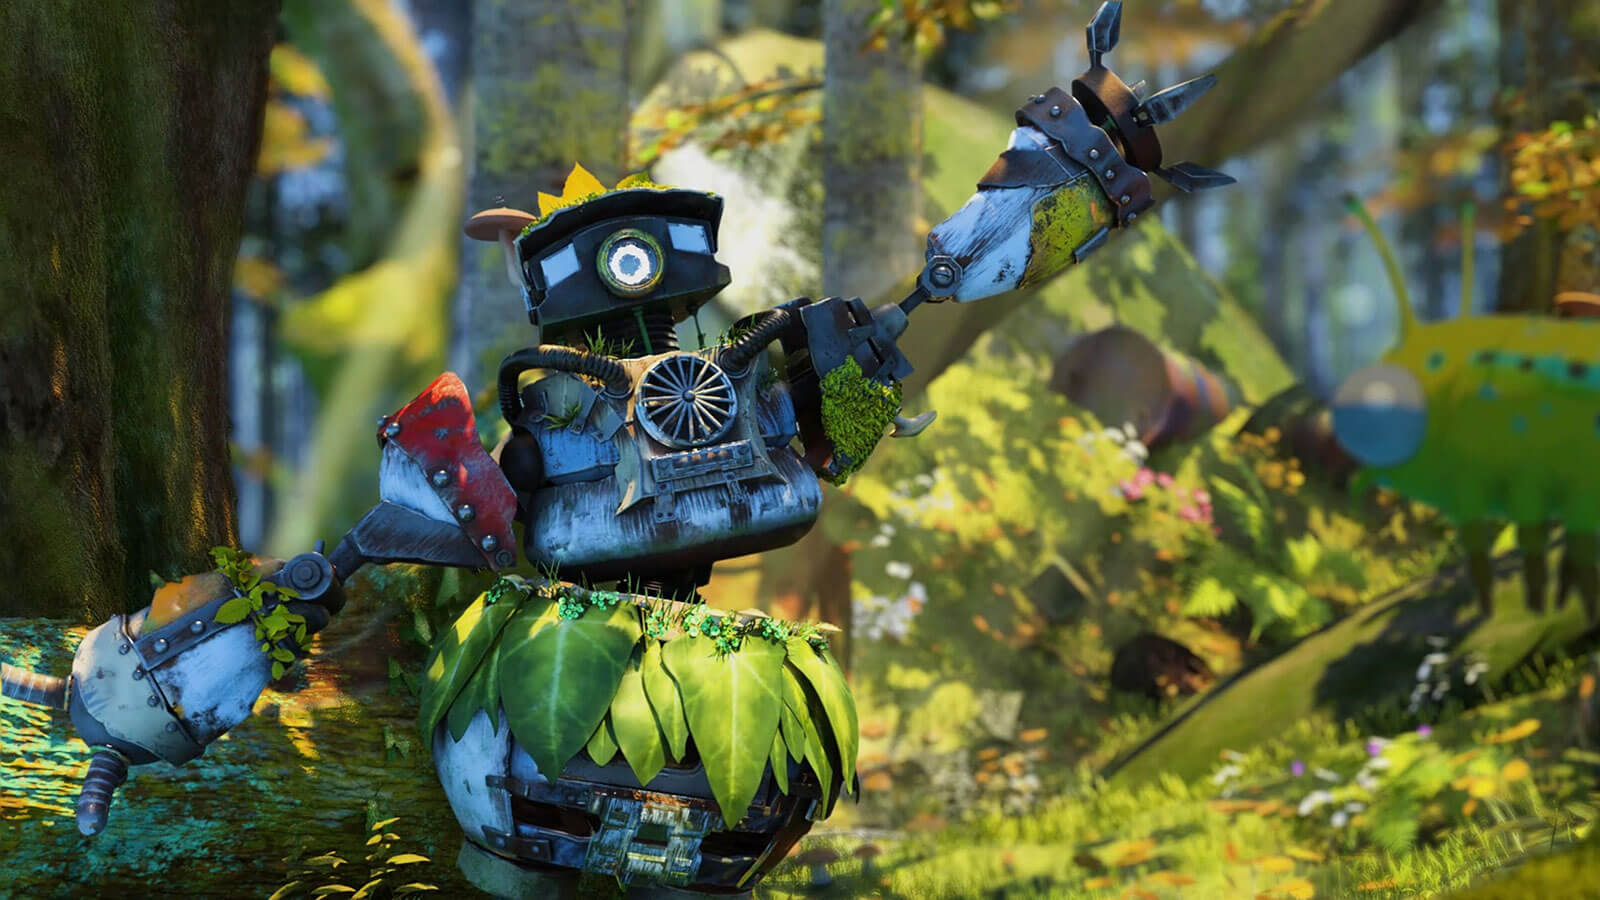 A robot made from various parts and covered in plants and moss poses in a forest